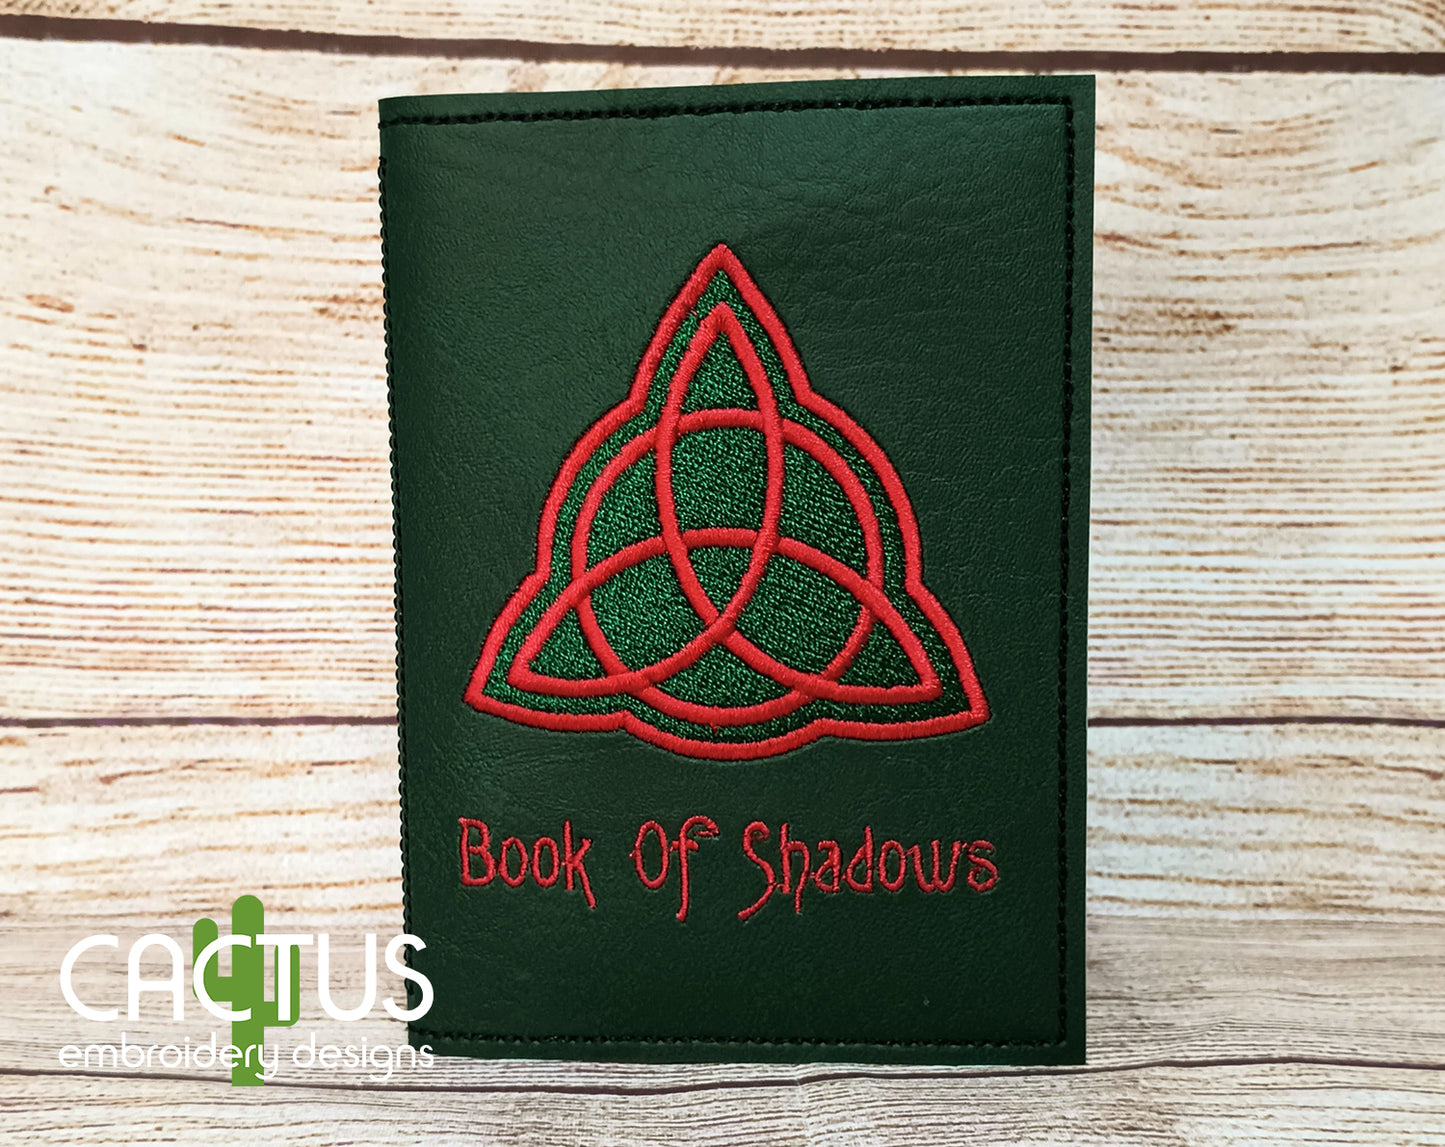 Book of Shadows Notebook Cover CactusEMB